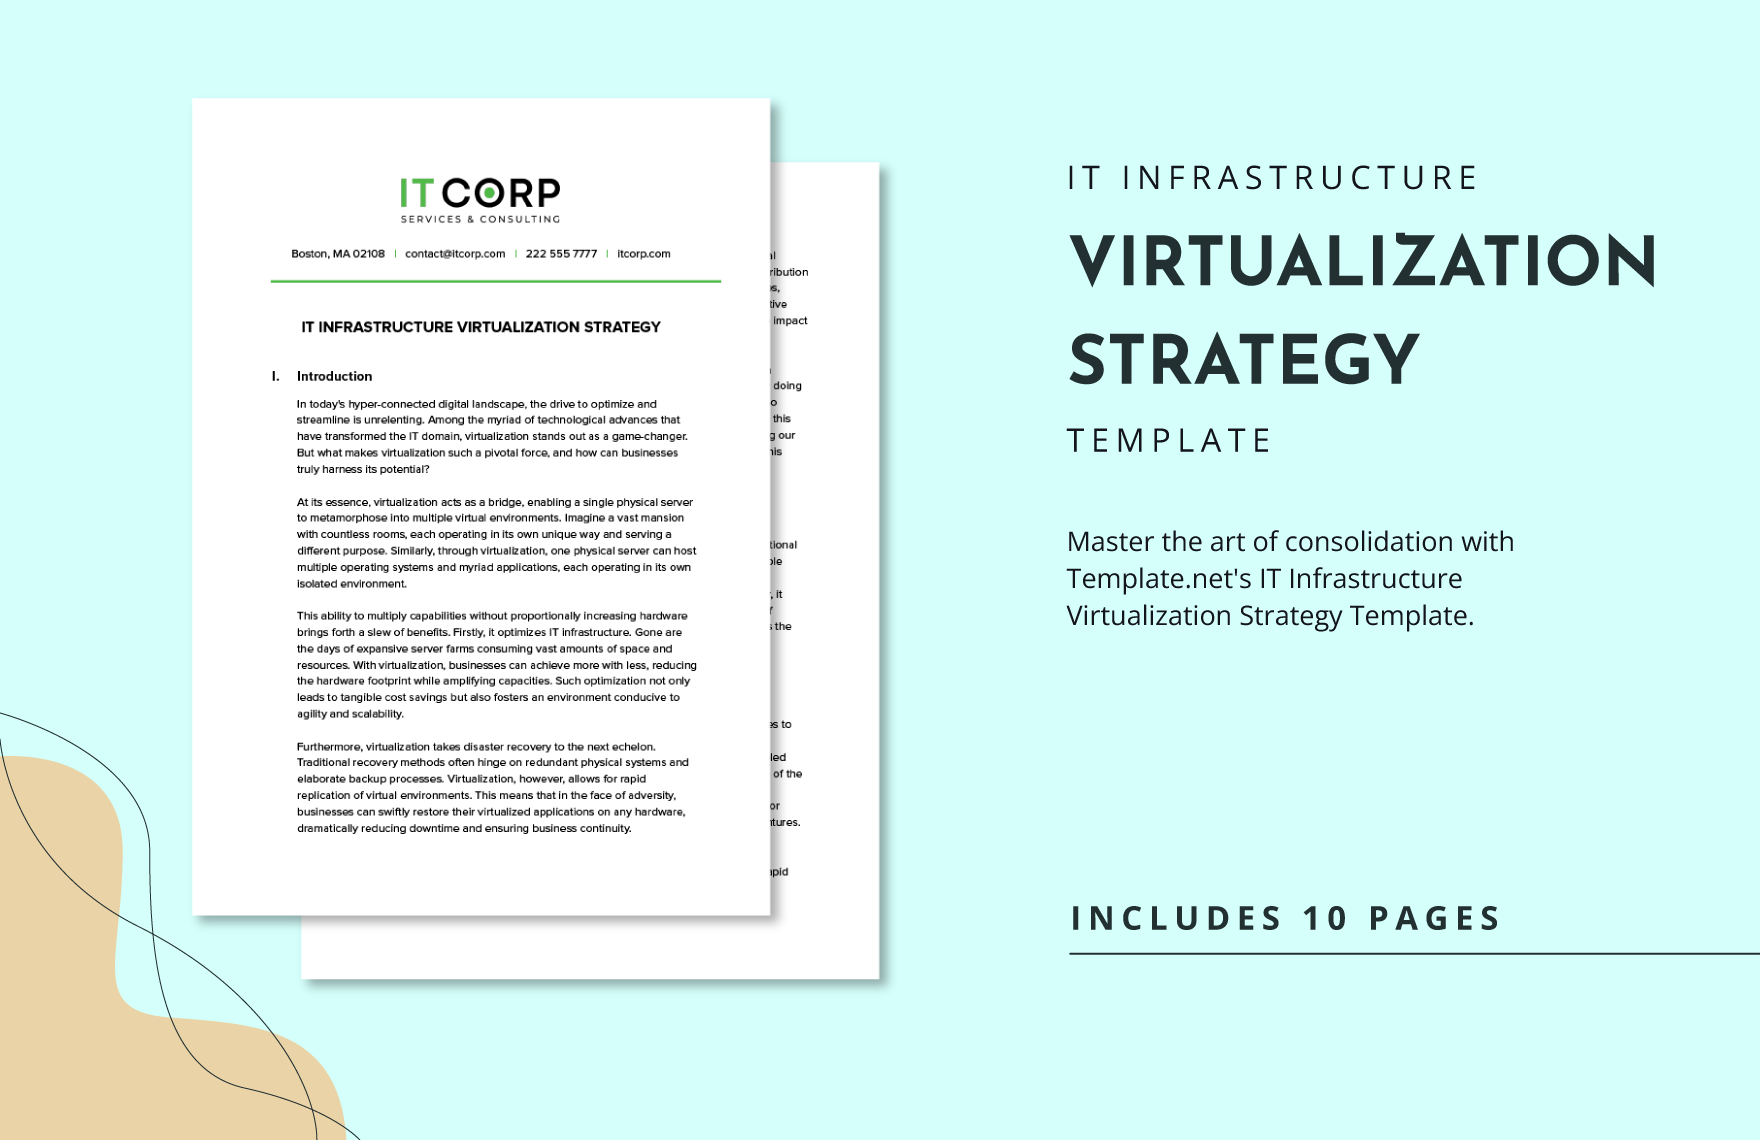 IT Infrastructure Virtualization Strategy Template